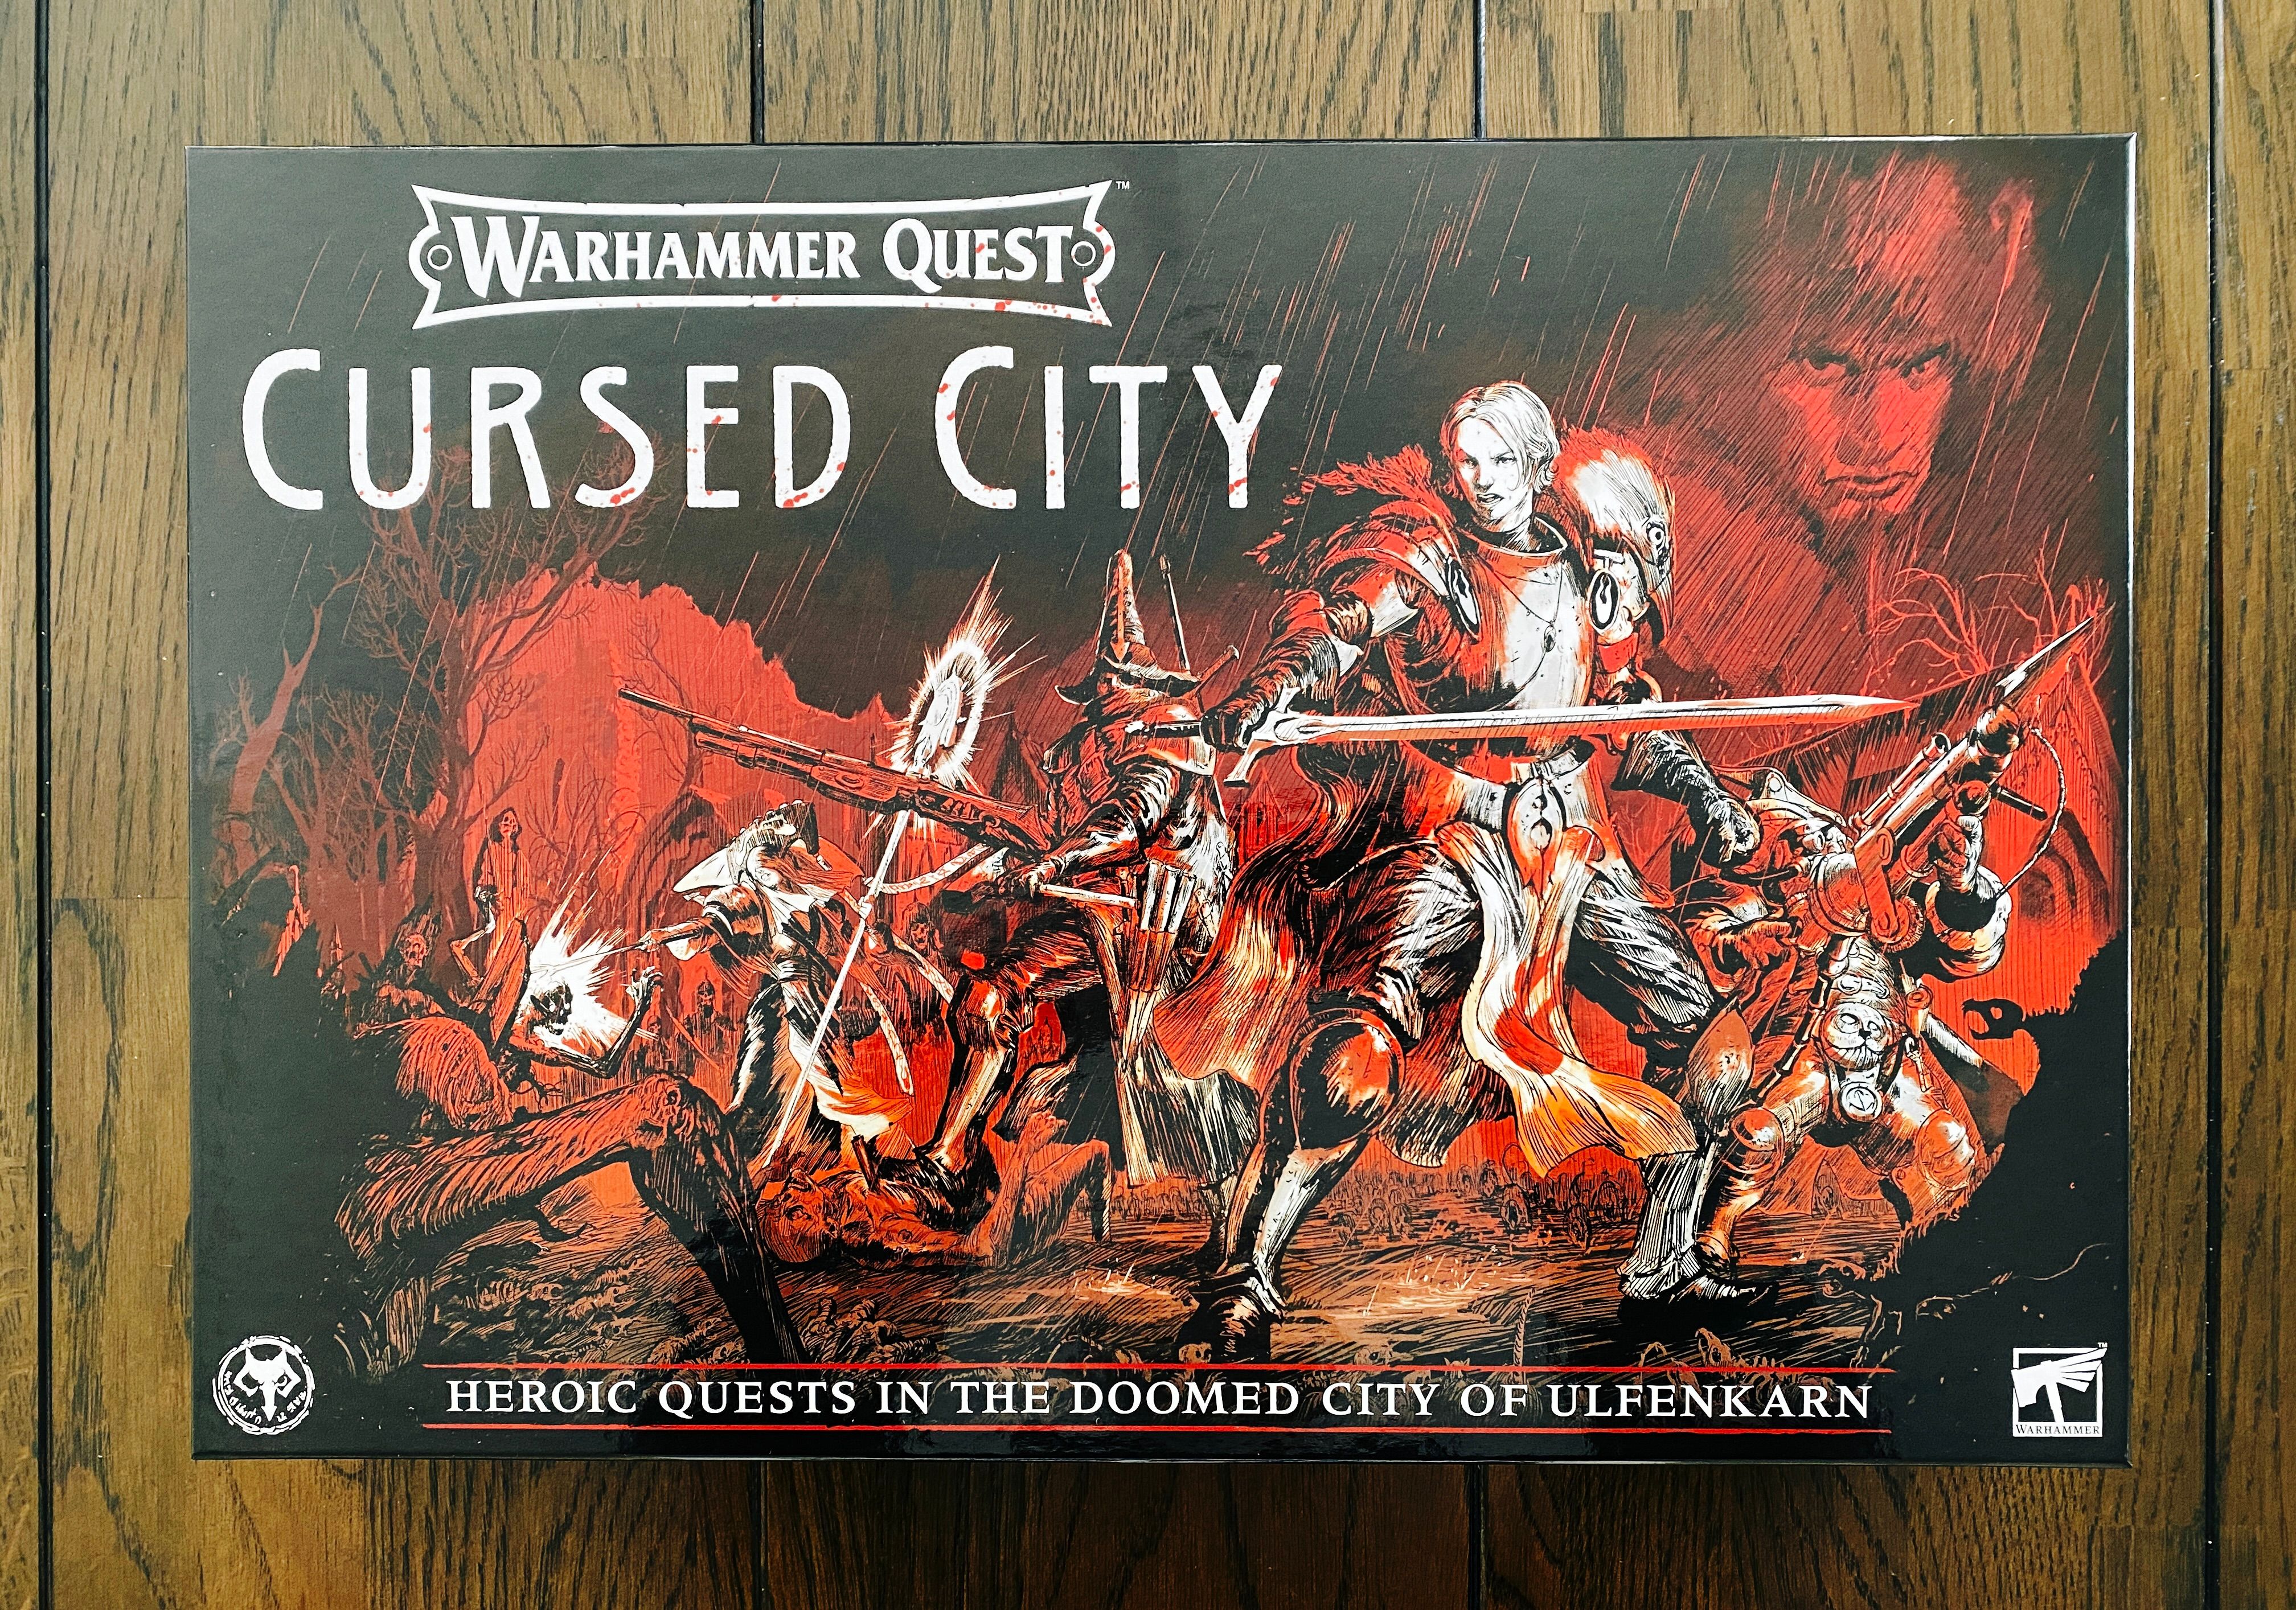 A photo of the box of Warhammer Quest: Cursed City. The artwork on the front is done in a pencil style primarily in red tones, and has several fantasy heroes in the middle battling off the skeletons that are lurking in the shadows to the sides.

The game itself is a co-op dungeon crawler and the box weighs a TON.